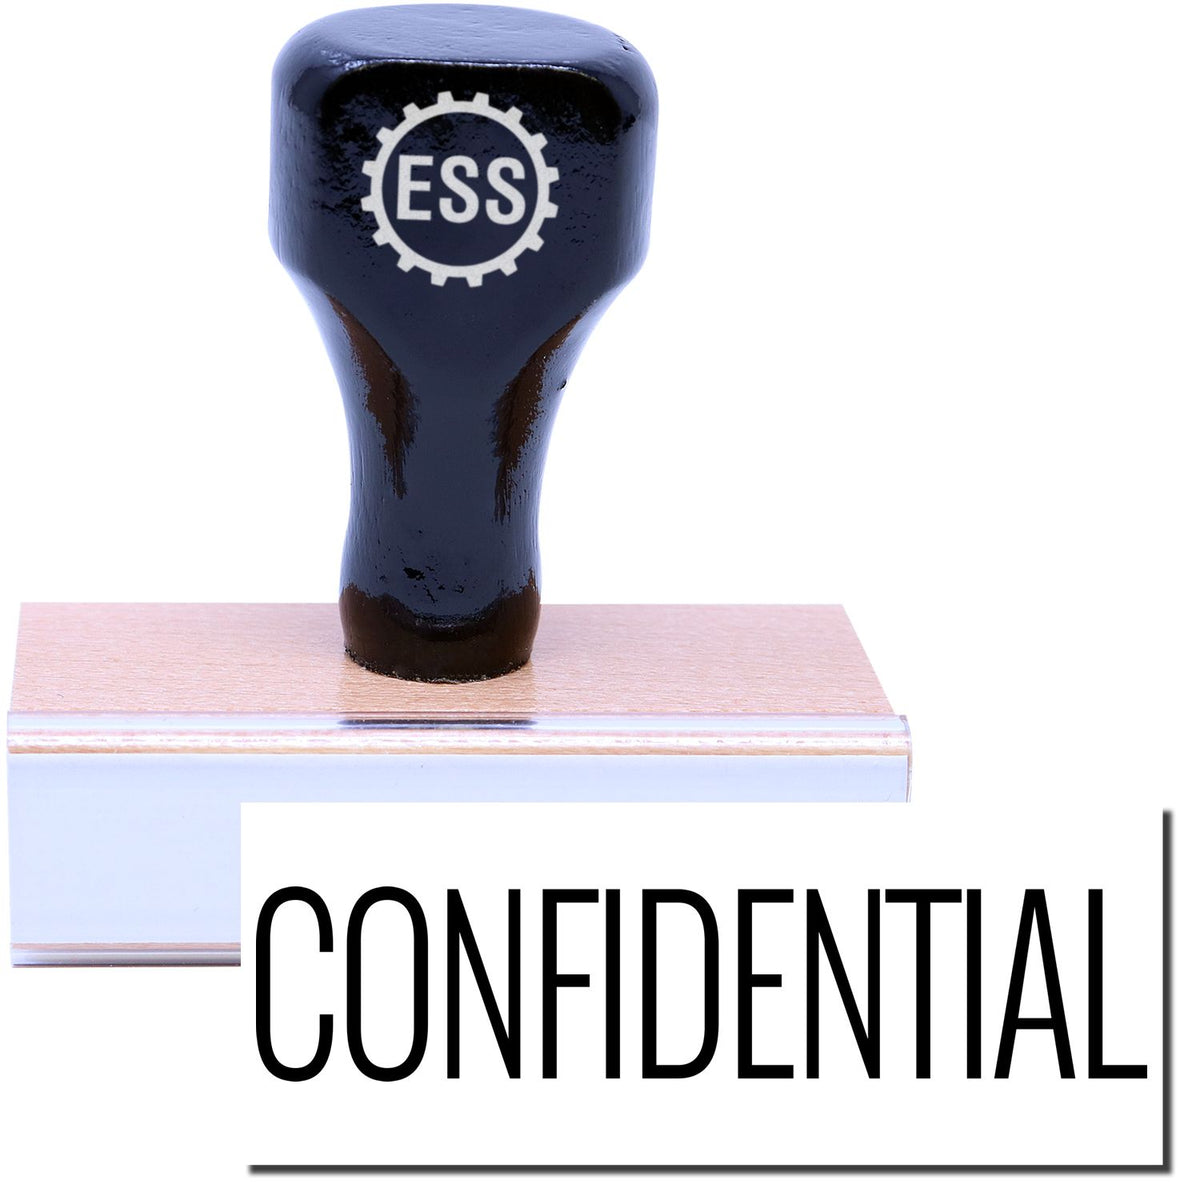 A stock office rubber stamp with a stamped image showing how the text &quot;CONFIDENTIAL&quot; in a narrow font is displayed after stamping.